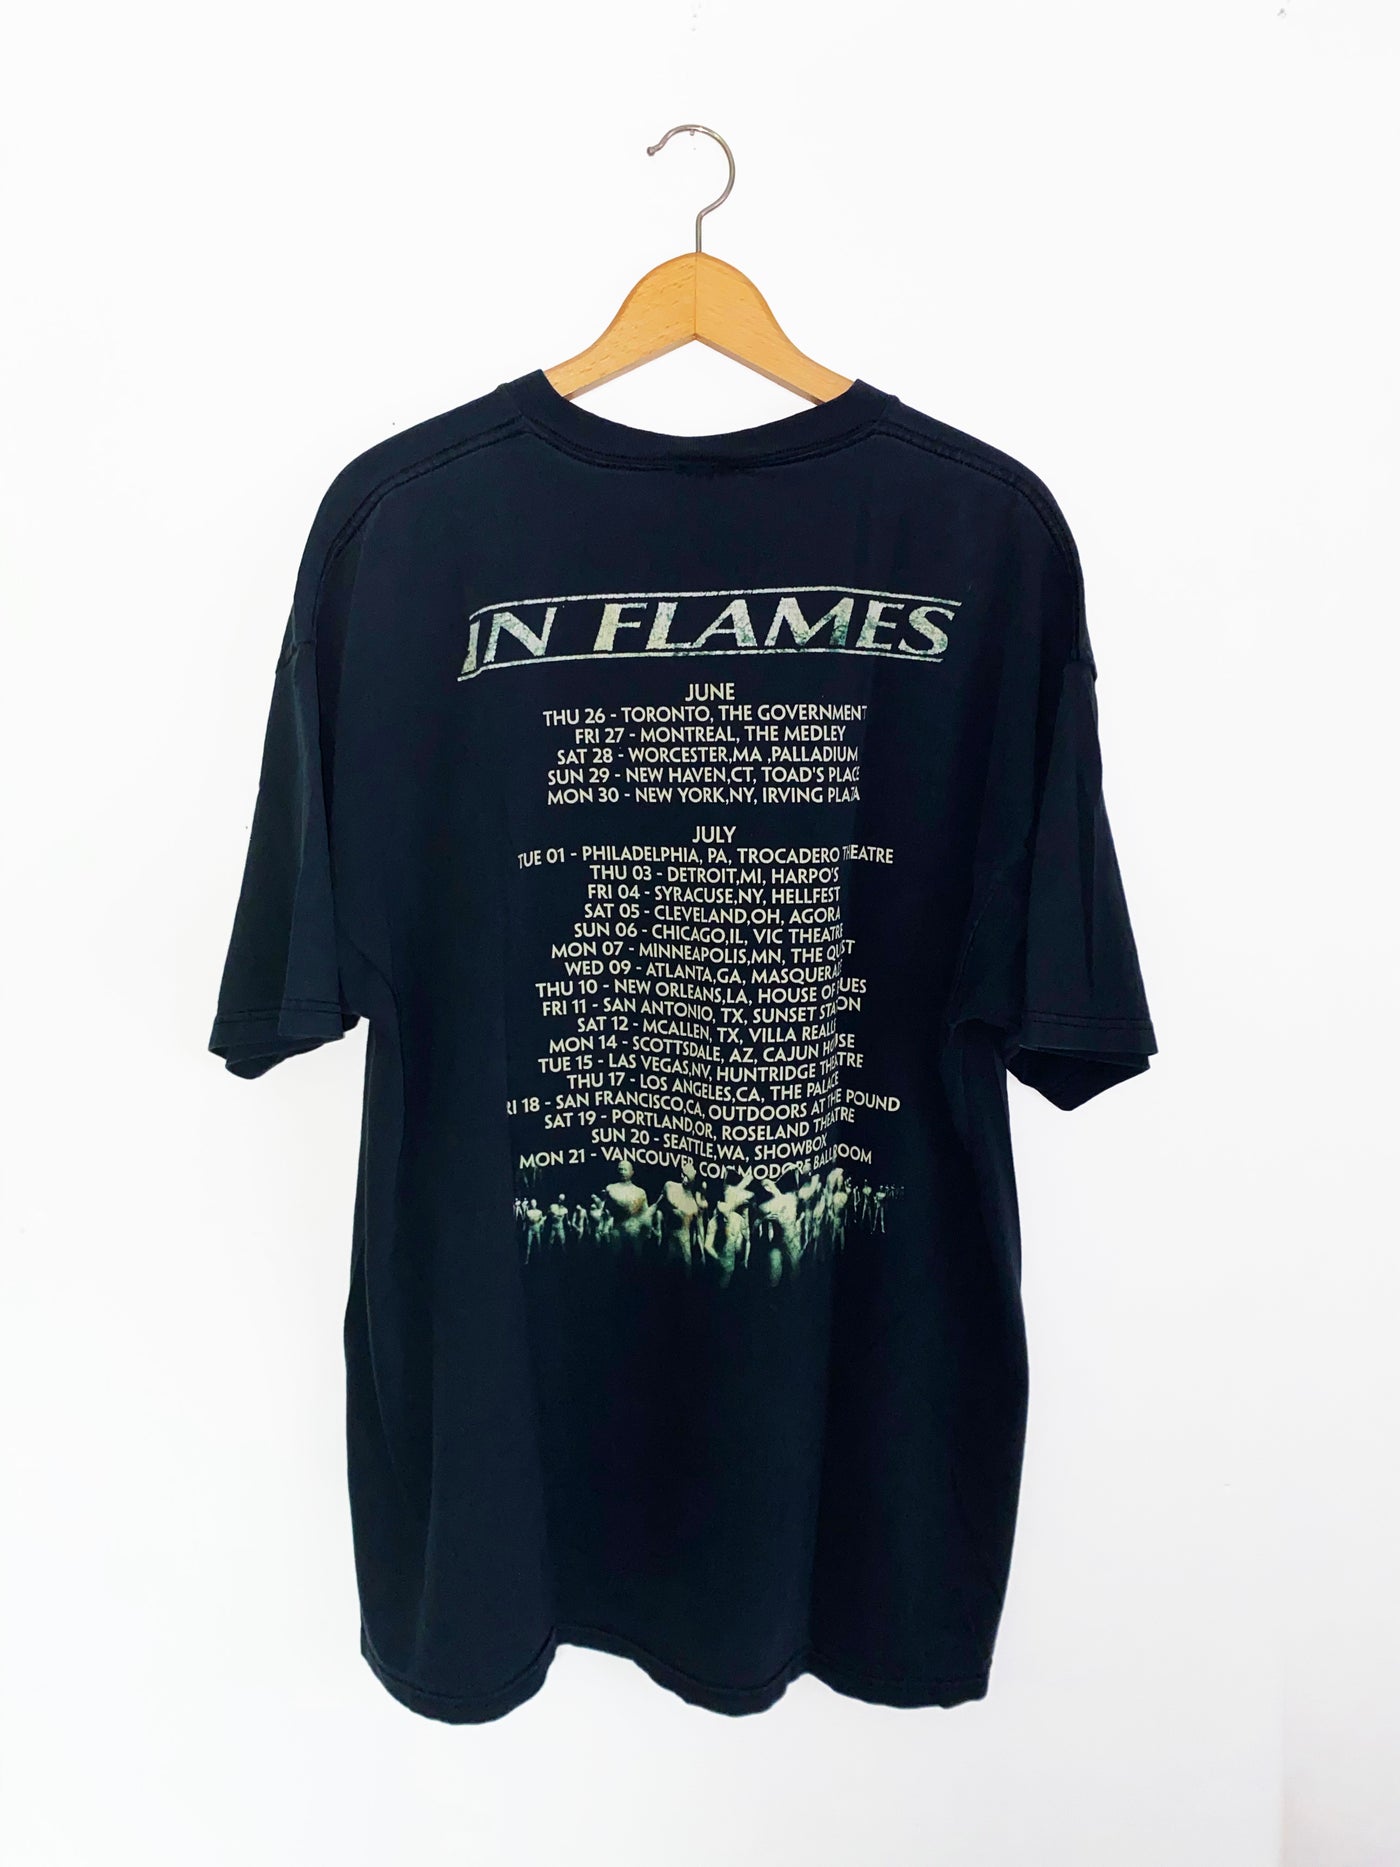 Vintage 2000 In Flames Tour Band T-Shirt